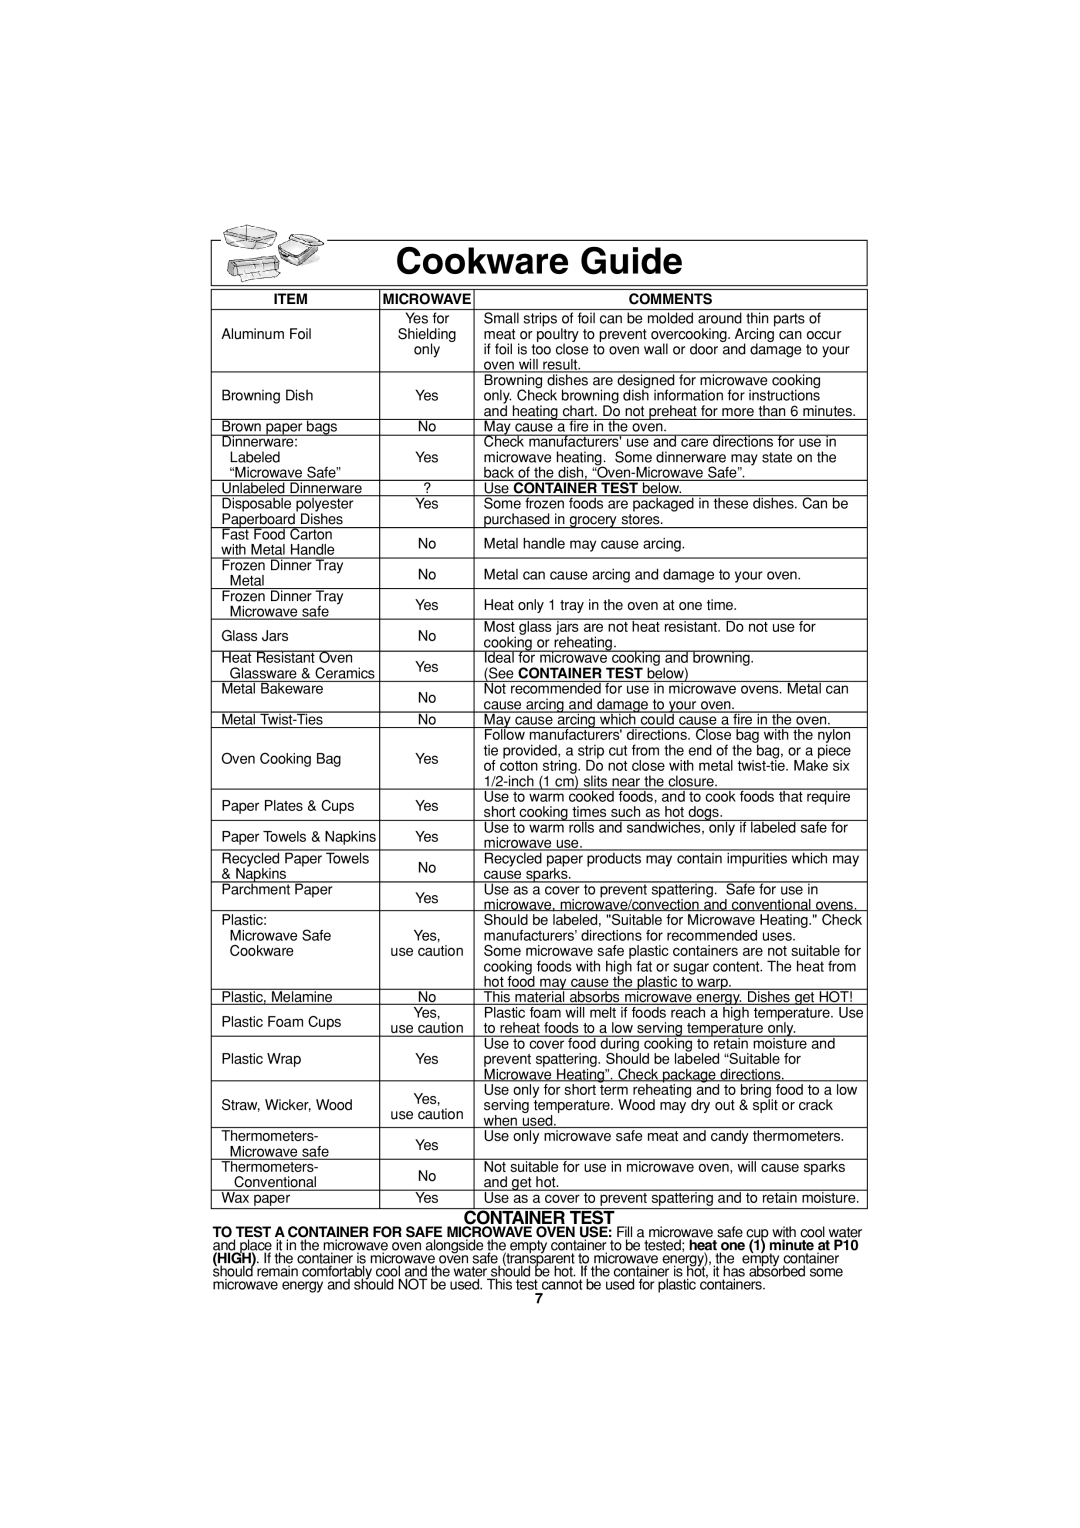 Panasonic NN-S503, NN-S553 important safety instructions Cookware Guide, Container Test 